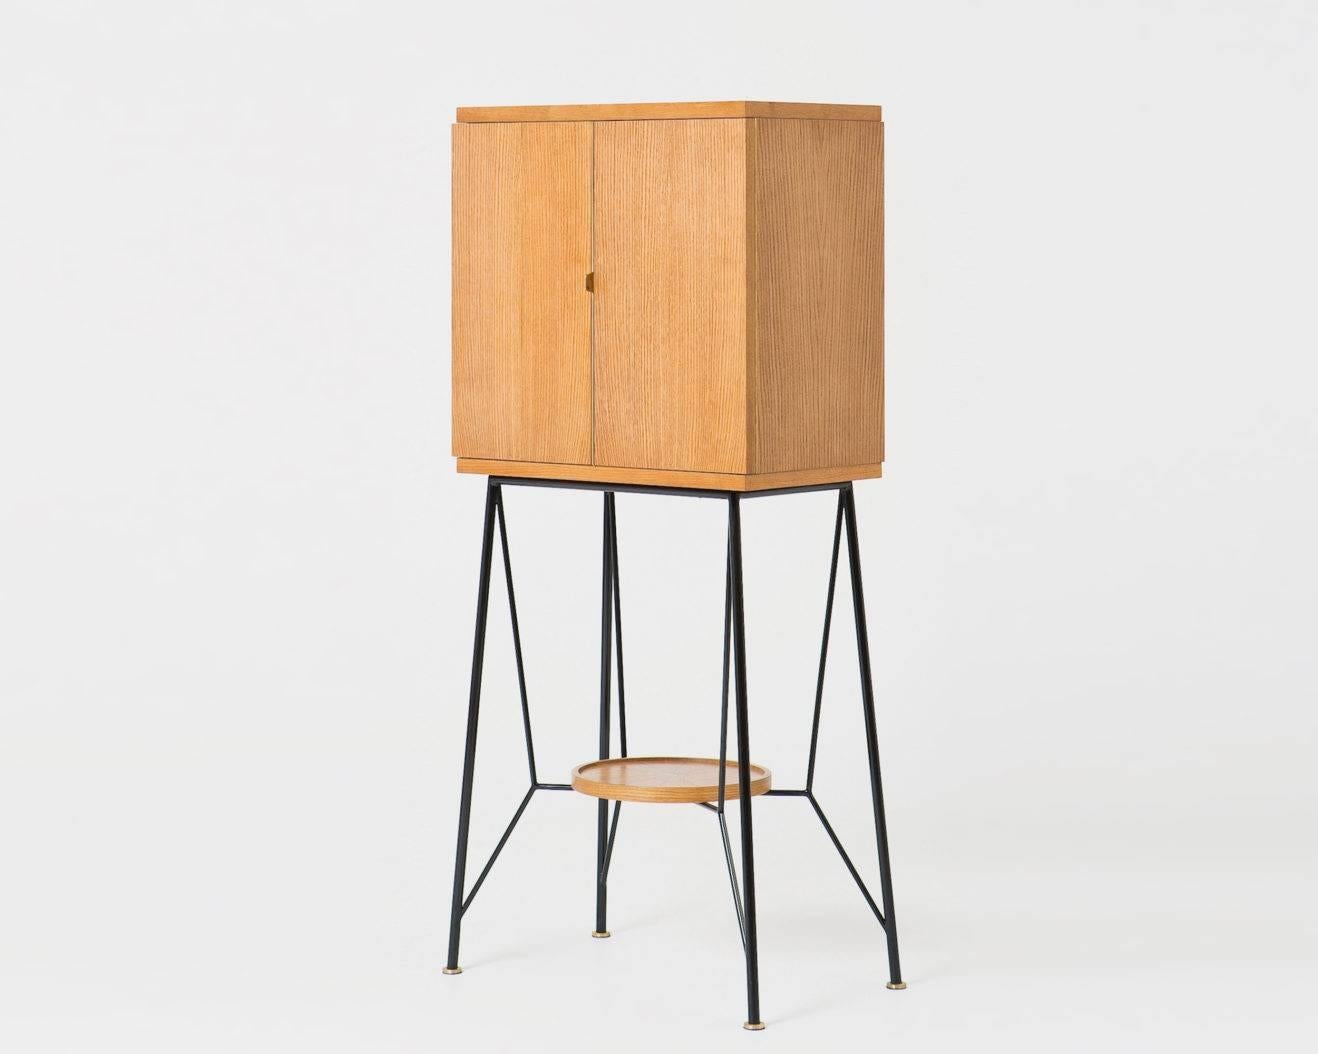 Bar cabinet by Russian designer Dmitry Samygin

Oak veneered, metal and brass
Measures: 160 cm x 66 cm x 44 cm

After studying Applied Arts at the National University of Art and Industry, Stroganov, Dmitry Samigyn quickly collaborated with his